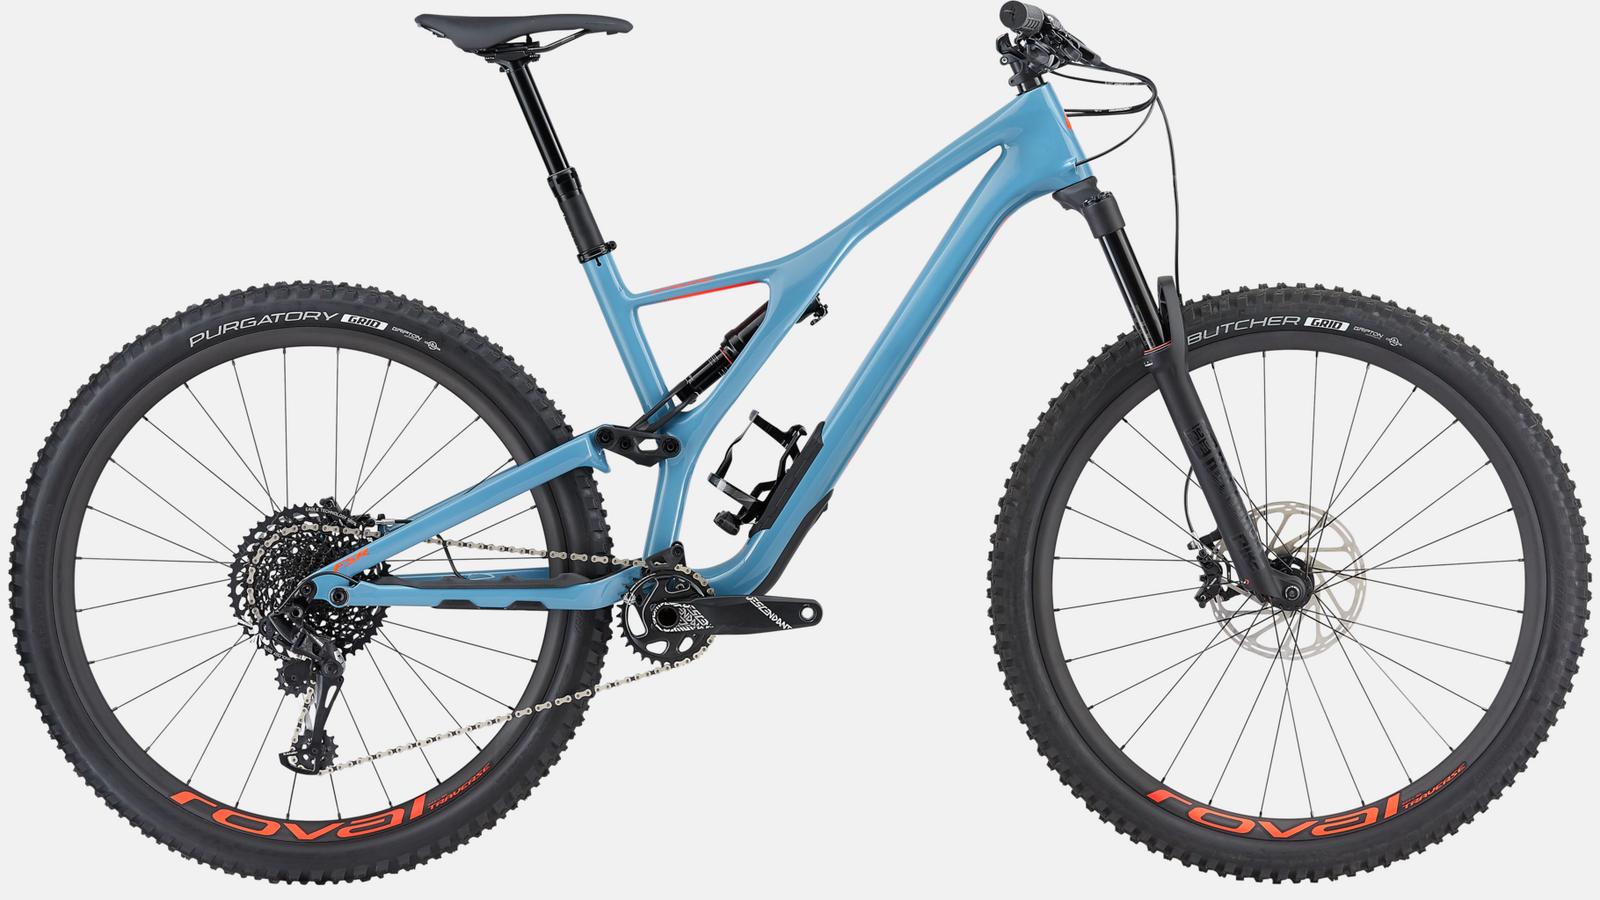 Paint for 2019 Specialized Men's Stumpjumper Expert 29 - Gloss Storm Grey